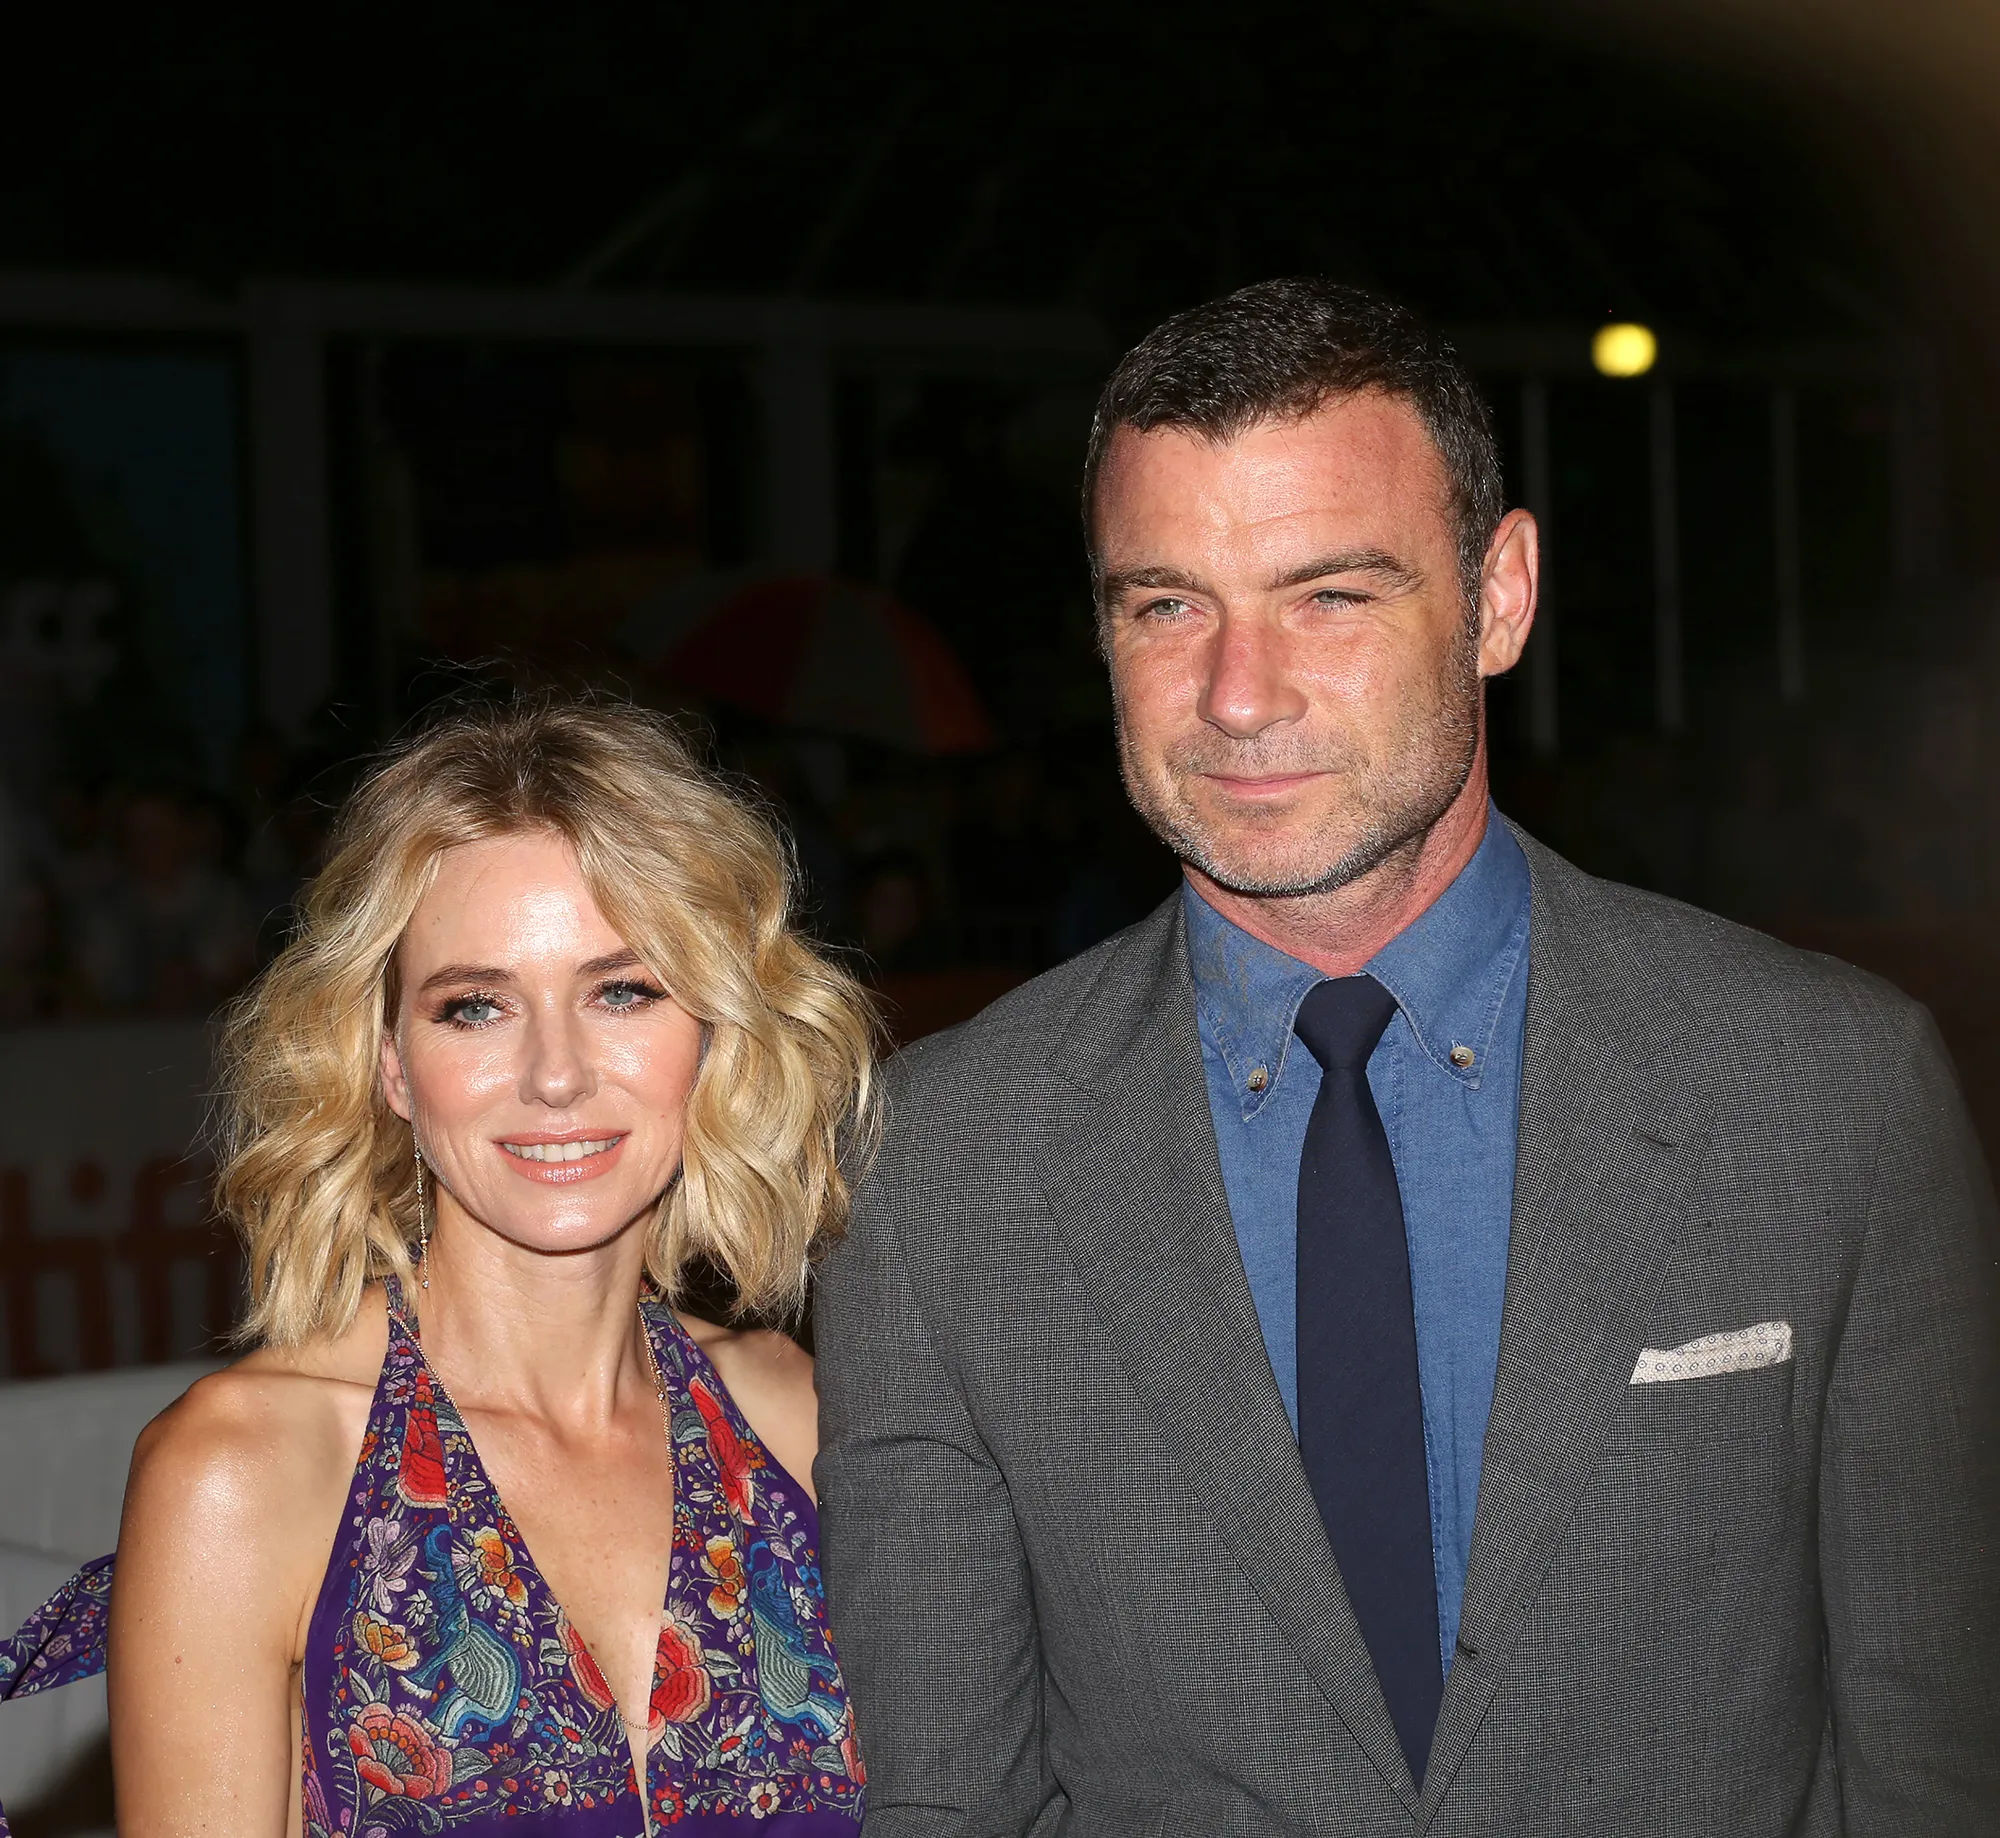 Who is the ex-wife of Liev Schreiber? Learn all about Naomi Watts